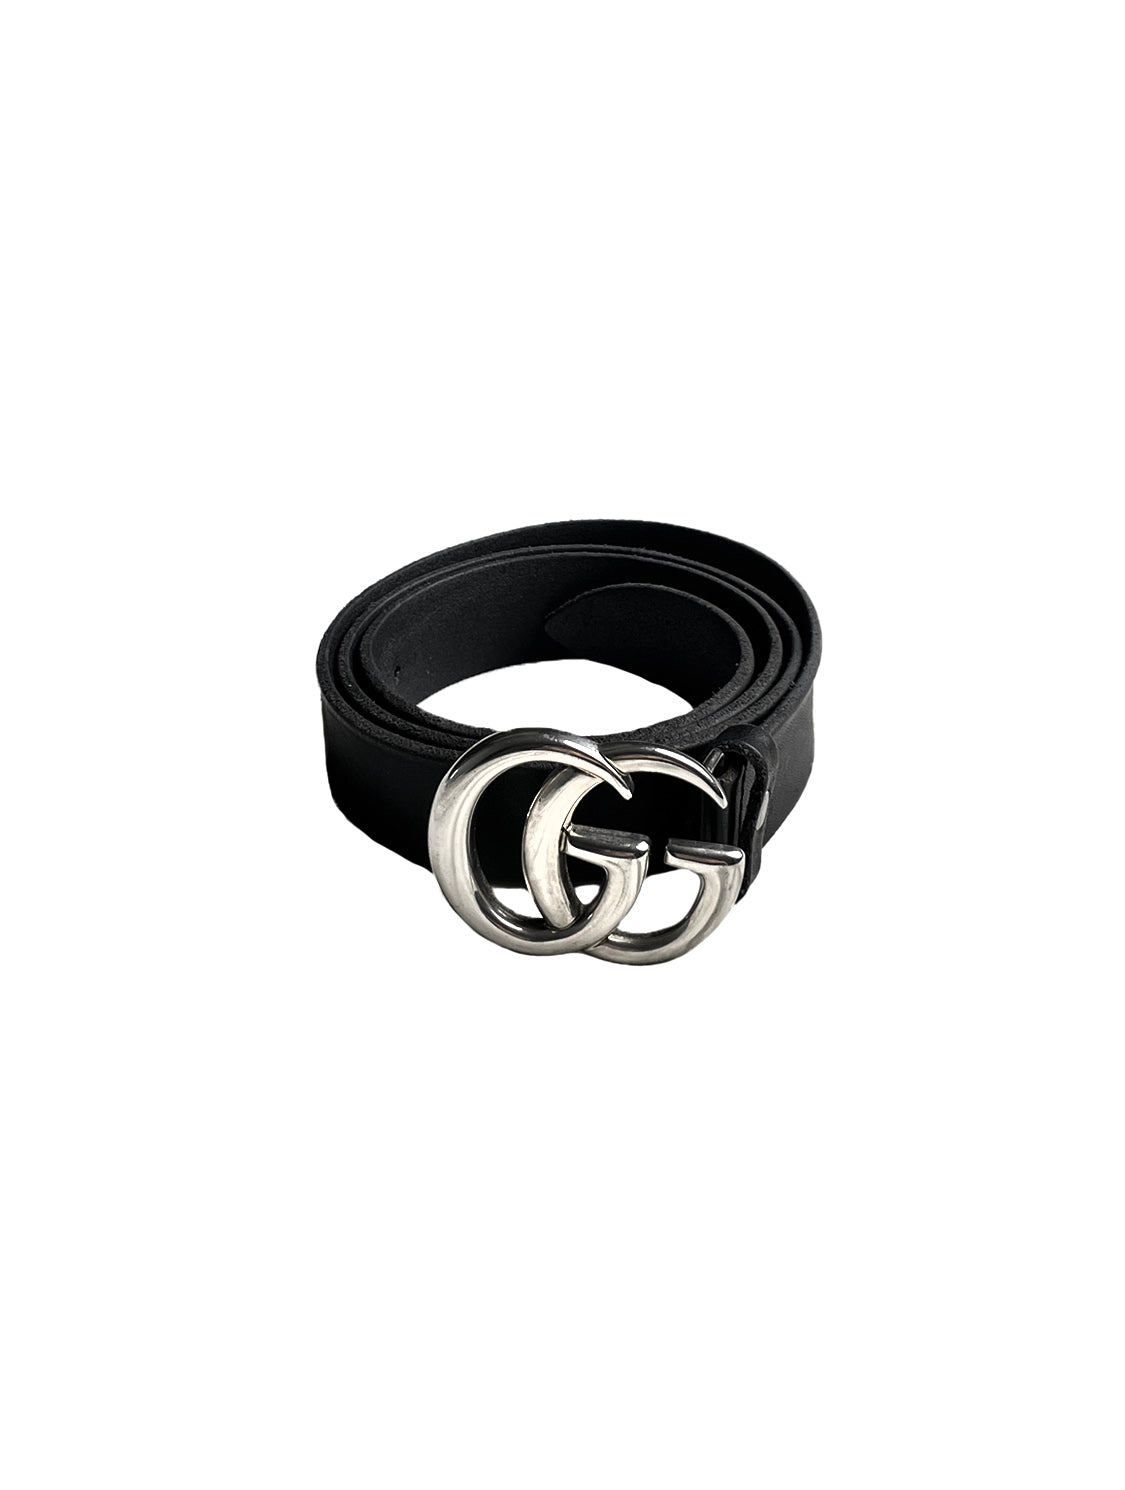 Gucci 2019 Men's Silver GG Leather Buckle Belt